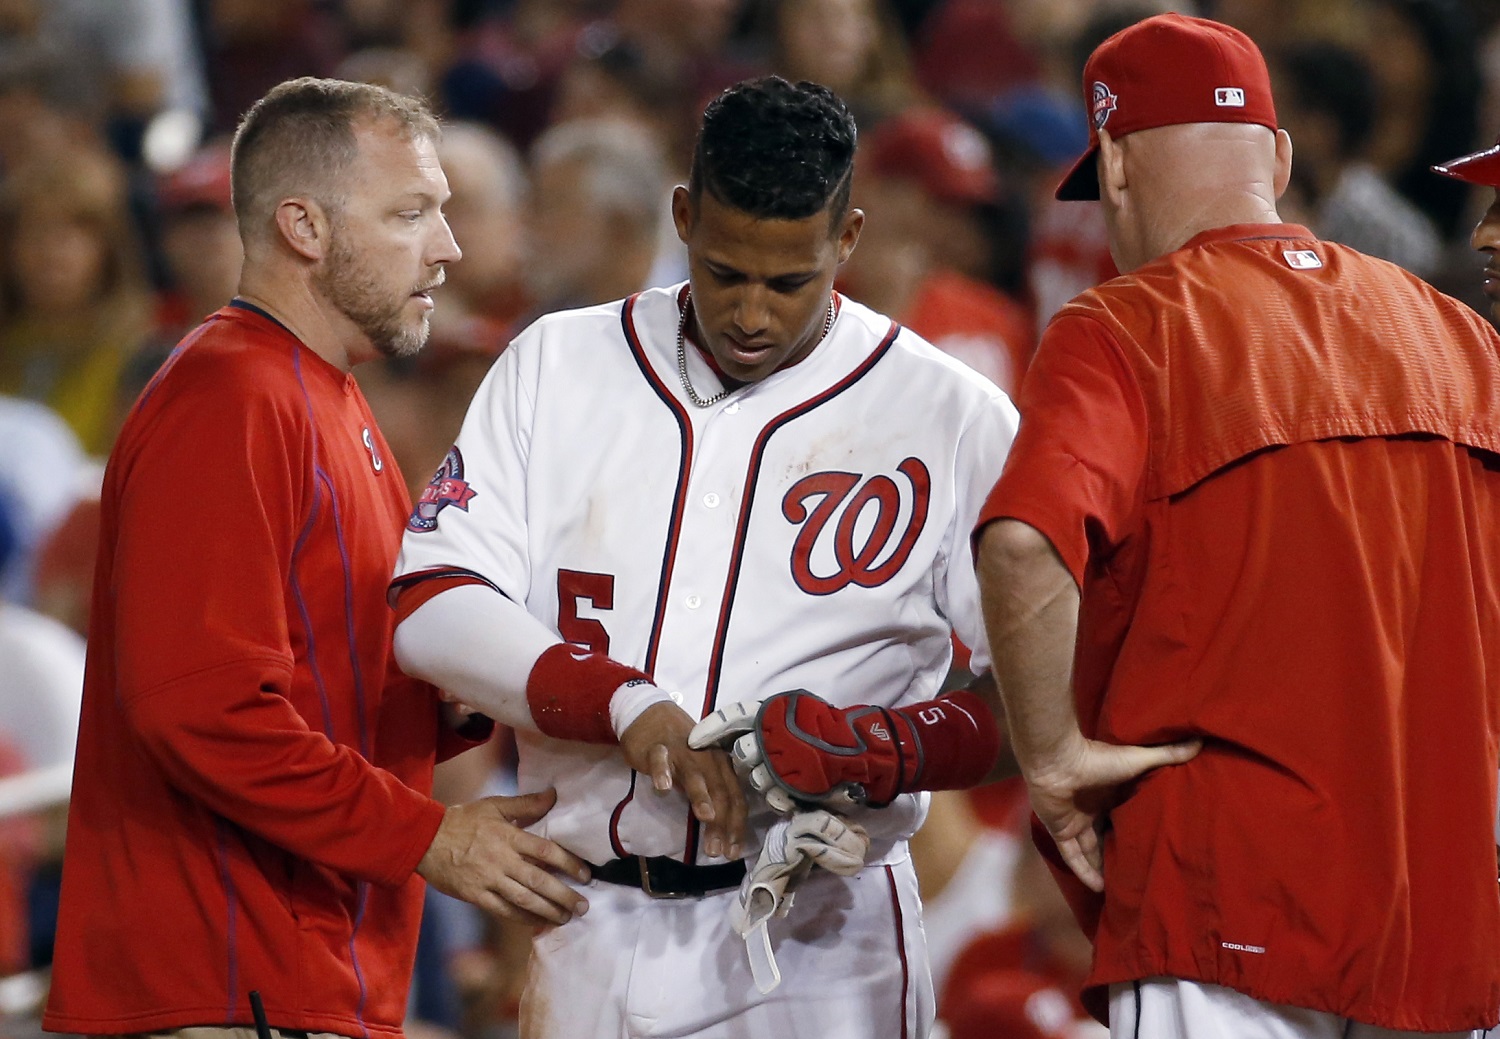 Washington Nationals' Yunel Escobar (5) points to his hand after he was hit by a pitch, as manager Matt Williams stands at right, during the fifth inning of a baseball game against the San Diego Padres at Nationals Park, Thursday, Aug. 27, 2015, in Washington. Escobar did not take the field for the next inning. (AP Photo/Alex Brandon)